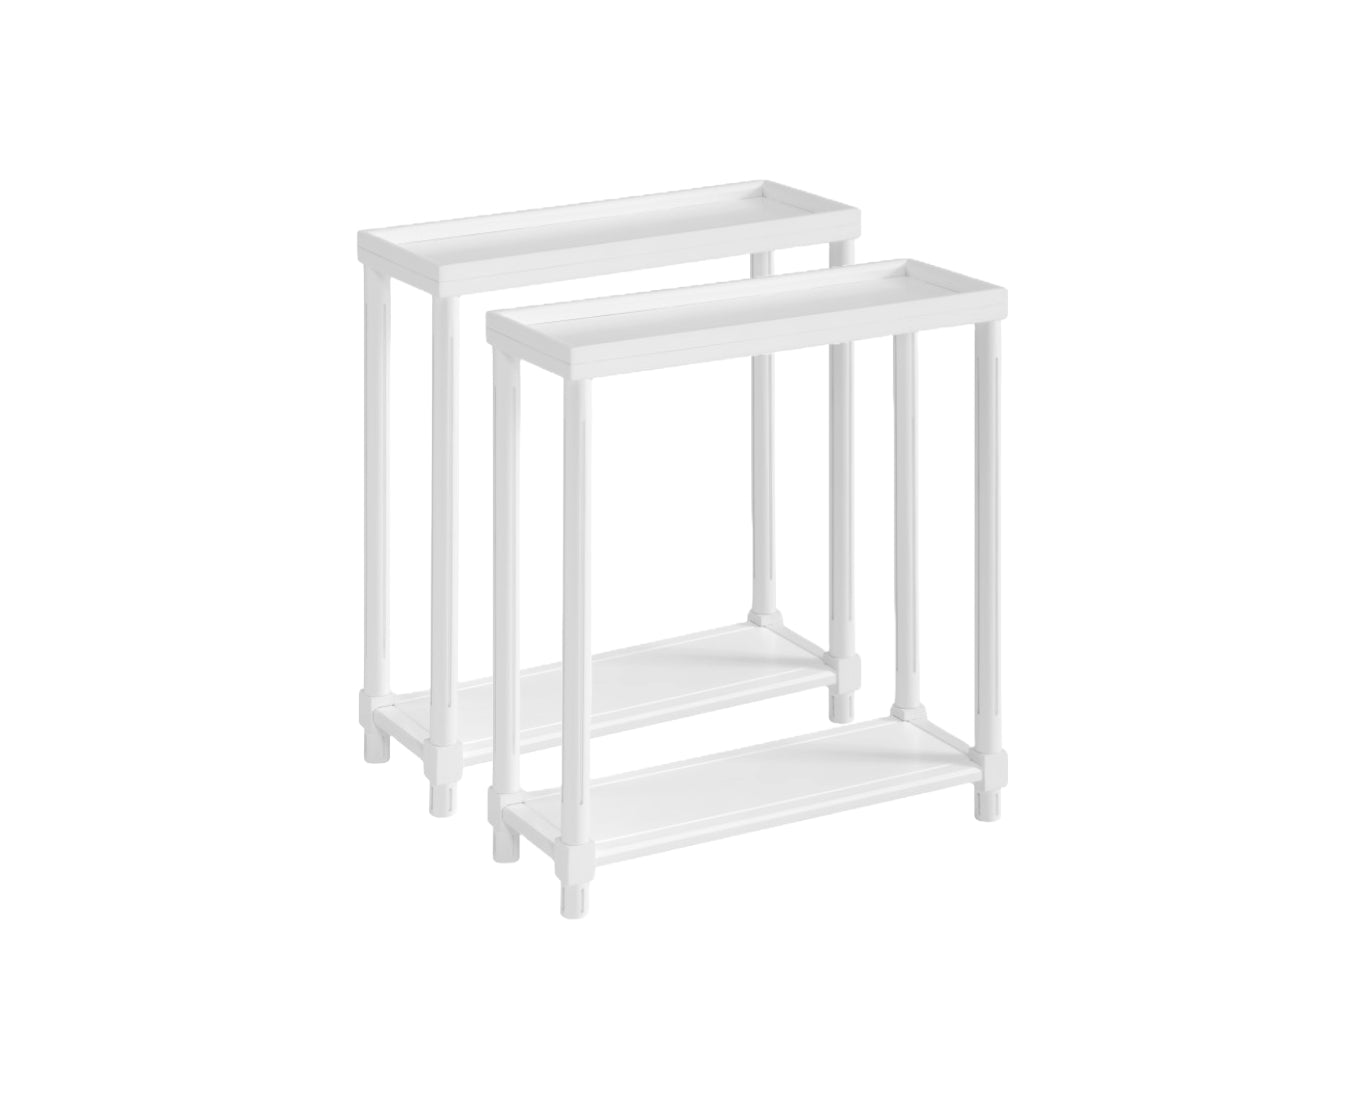 Set Of Two 24" White Narrow Wood End Tables With Shelf